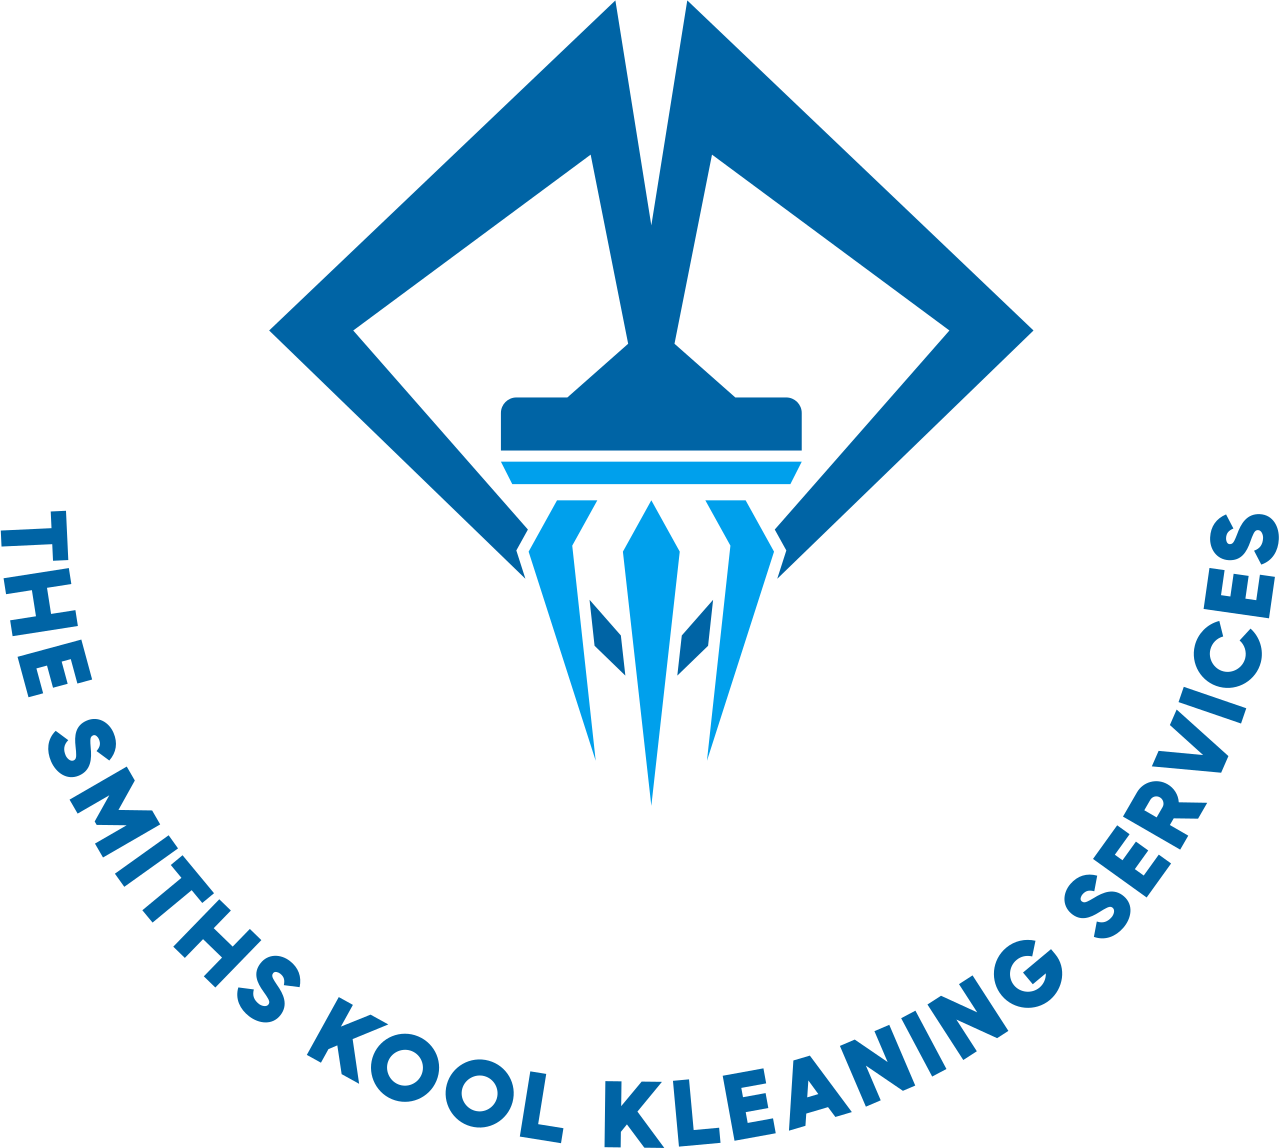 The Smiths Kool Kleaning Services's logo